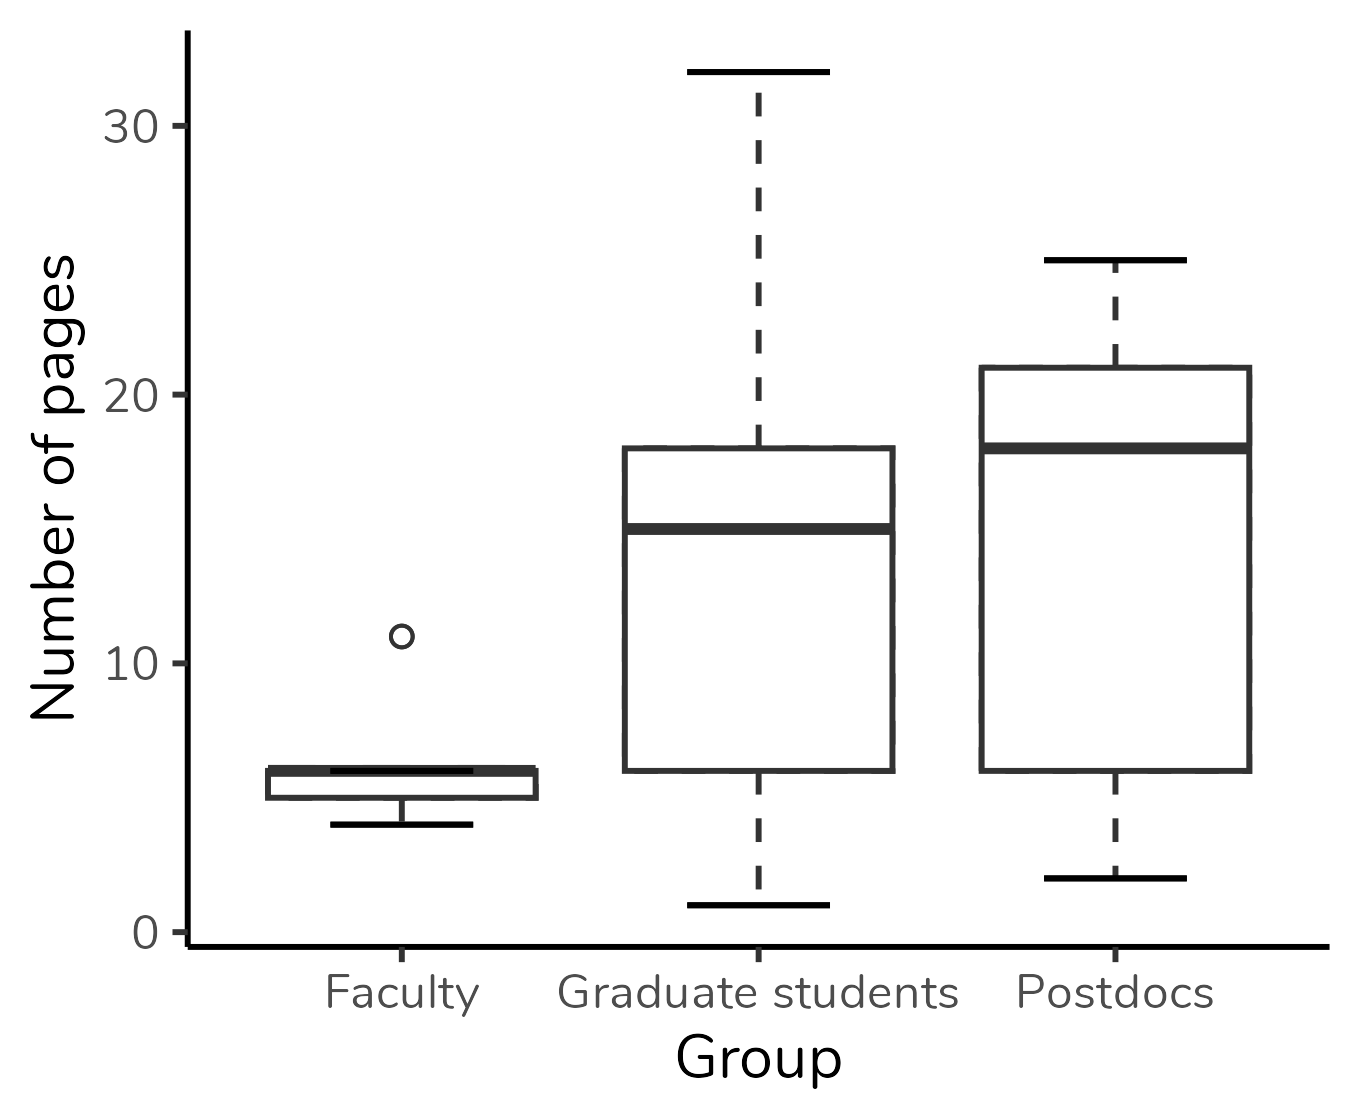 Boxplot based on the research article of @schenk2014too.